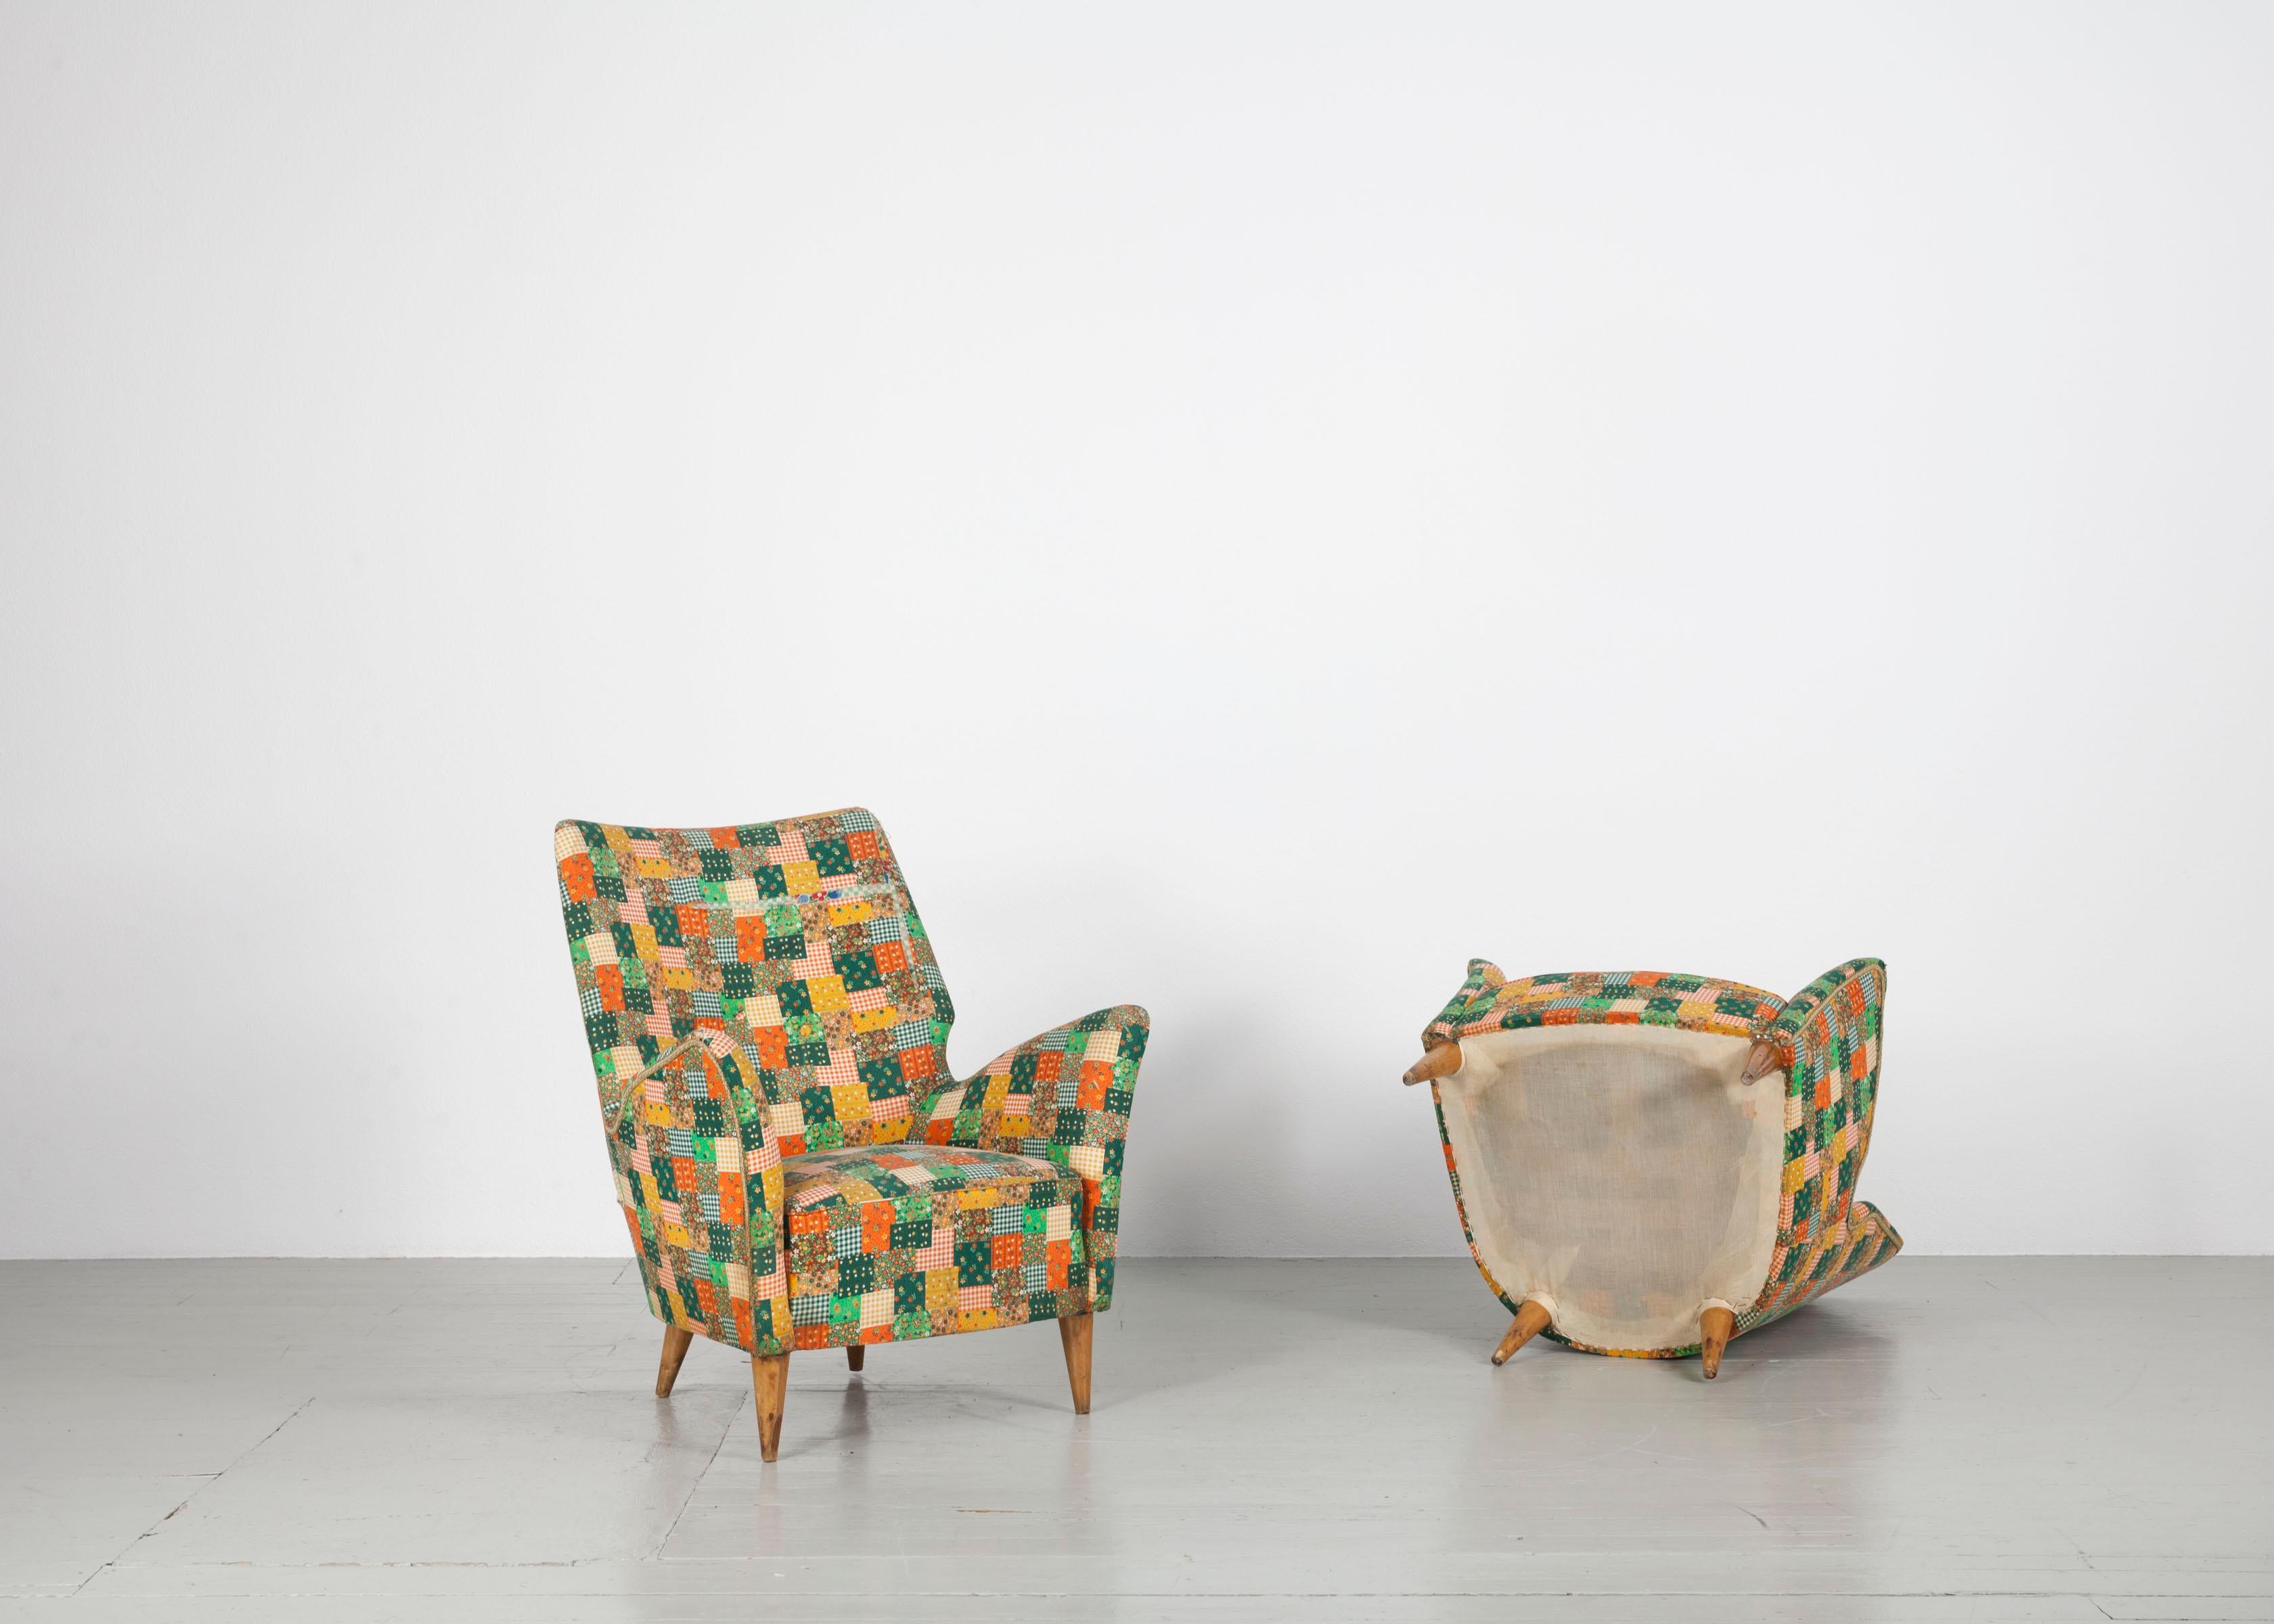 Fabric Set of 2 Chairs, I.S.A. Bergamo, 1950s For Sale